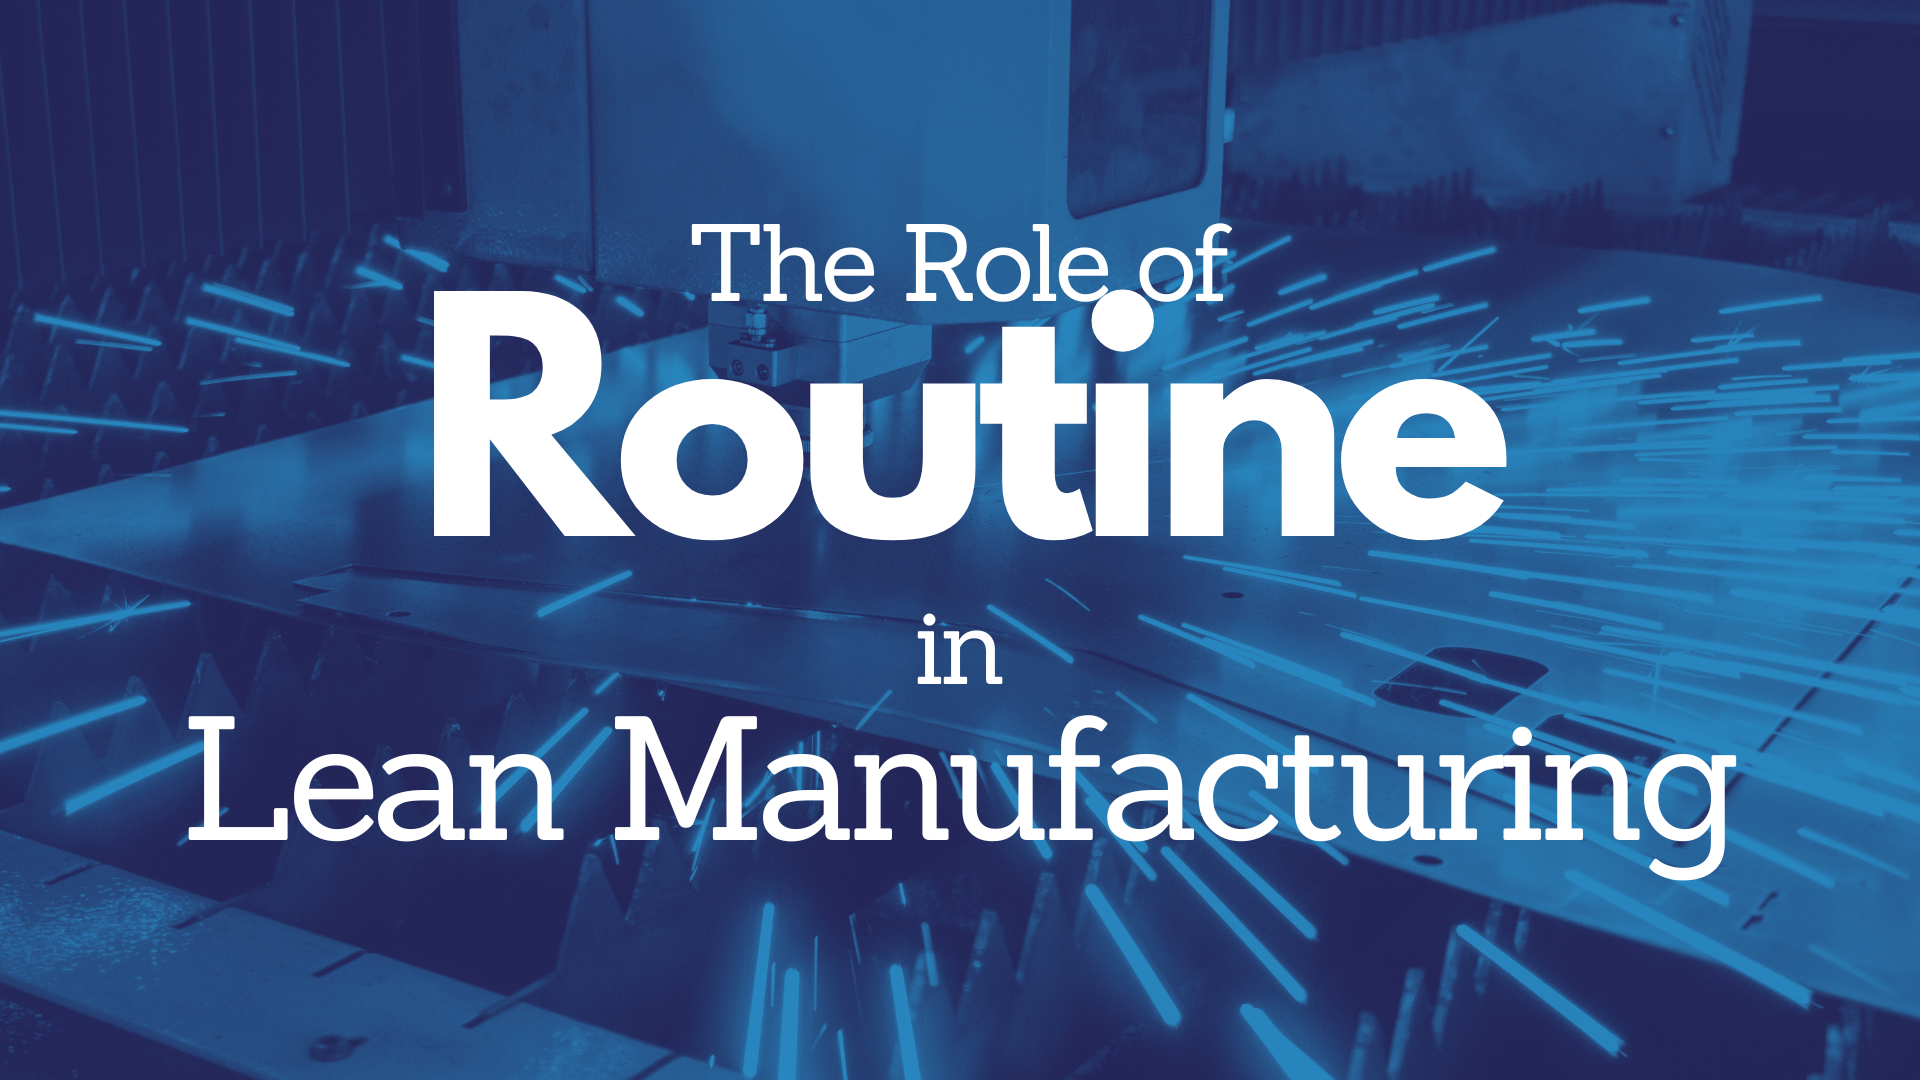 The Role of Routine in Lean Manufacturing